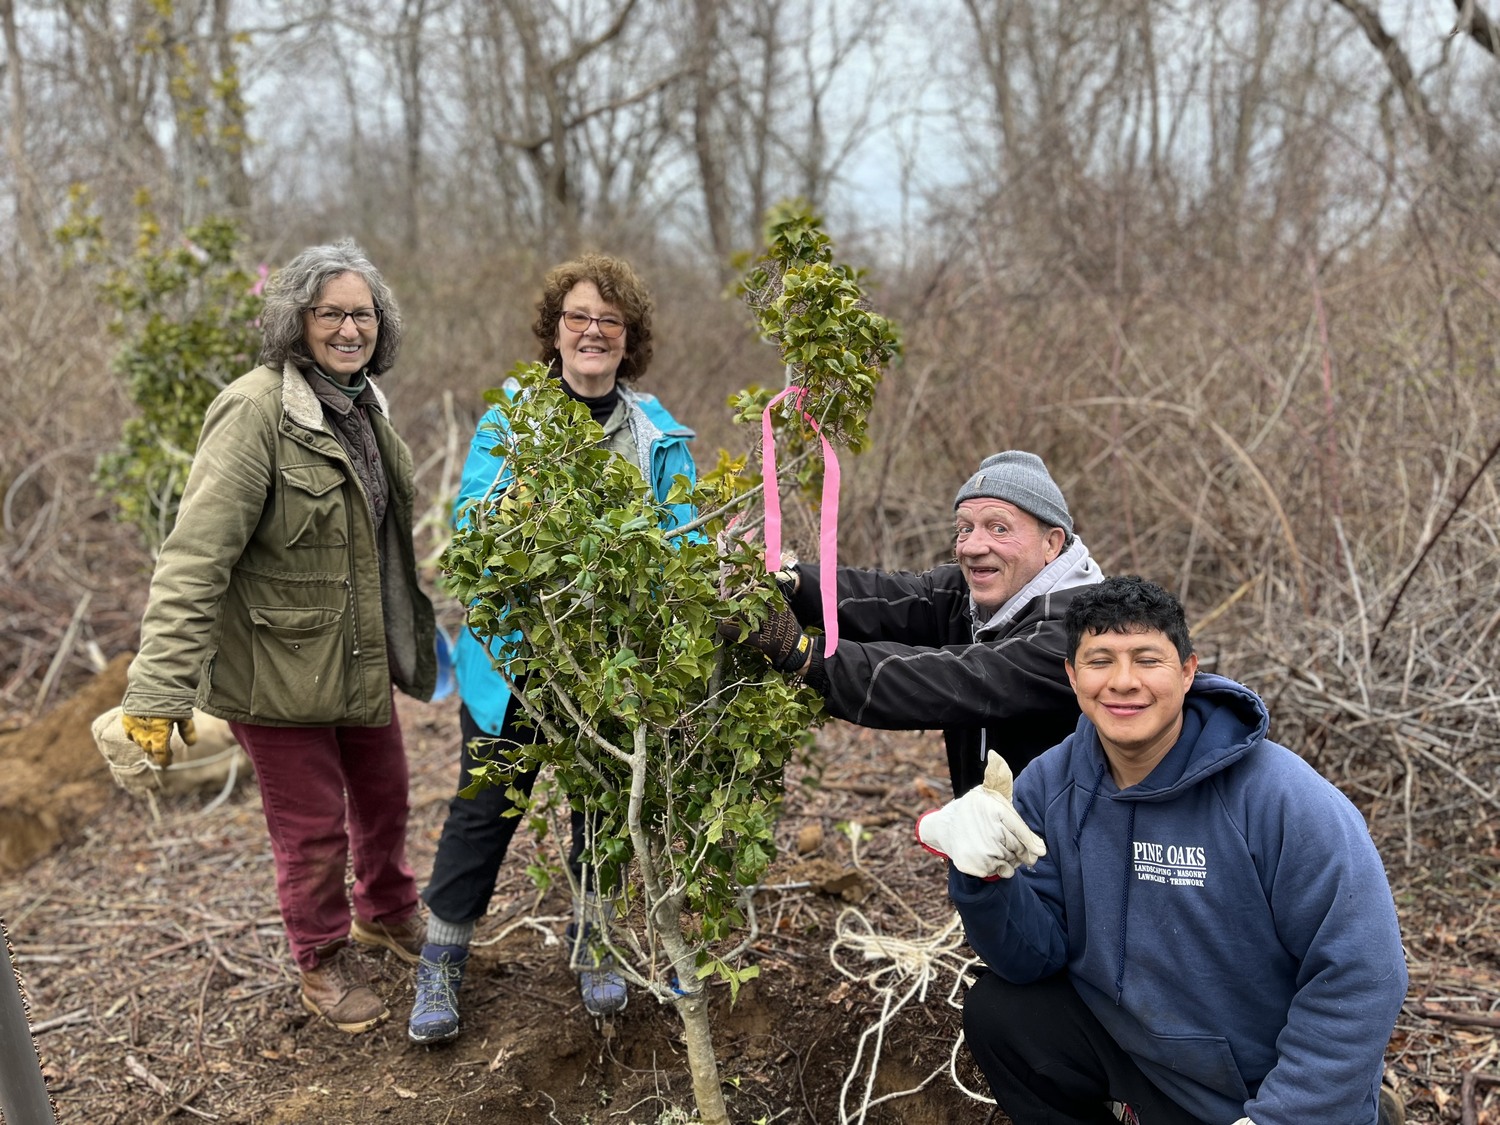 Carol Edwards, Robin Simmen, Brian Armstrong and Oscar Membrano plant holly trees in March.